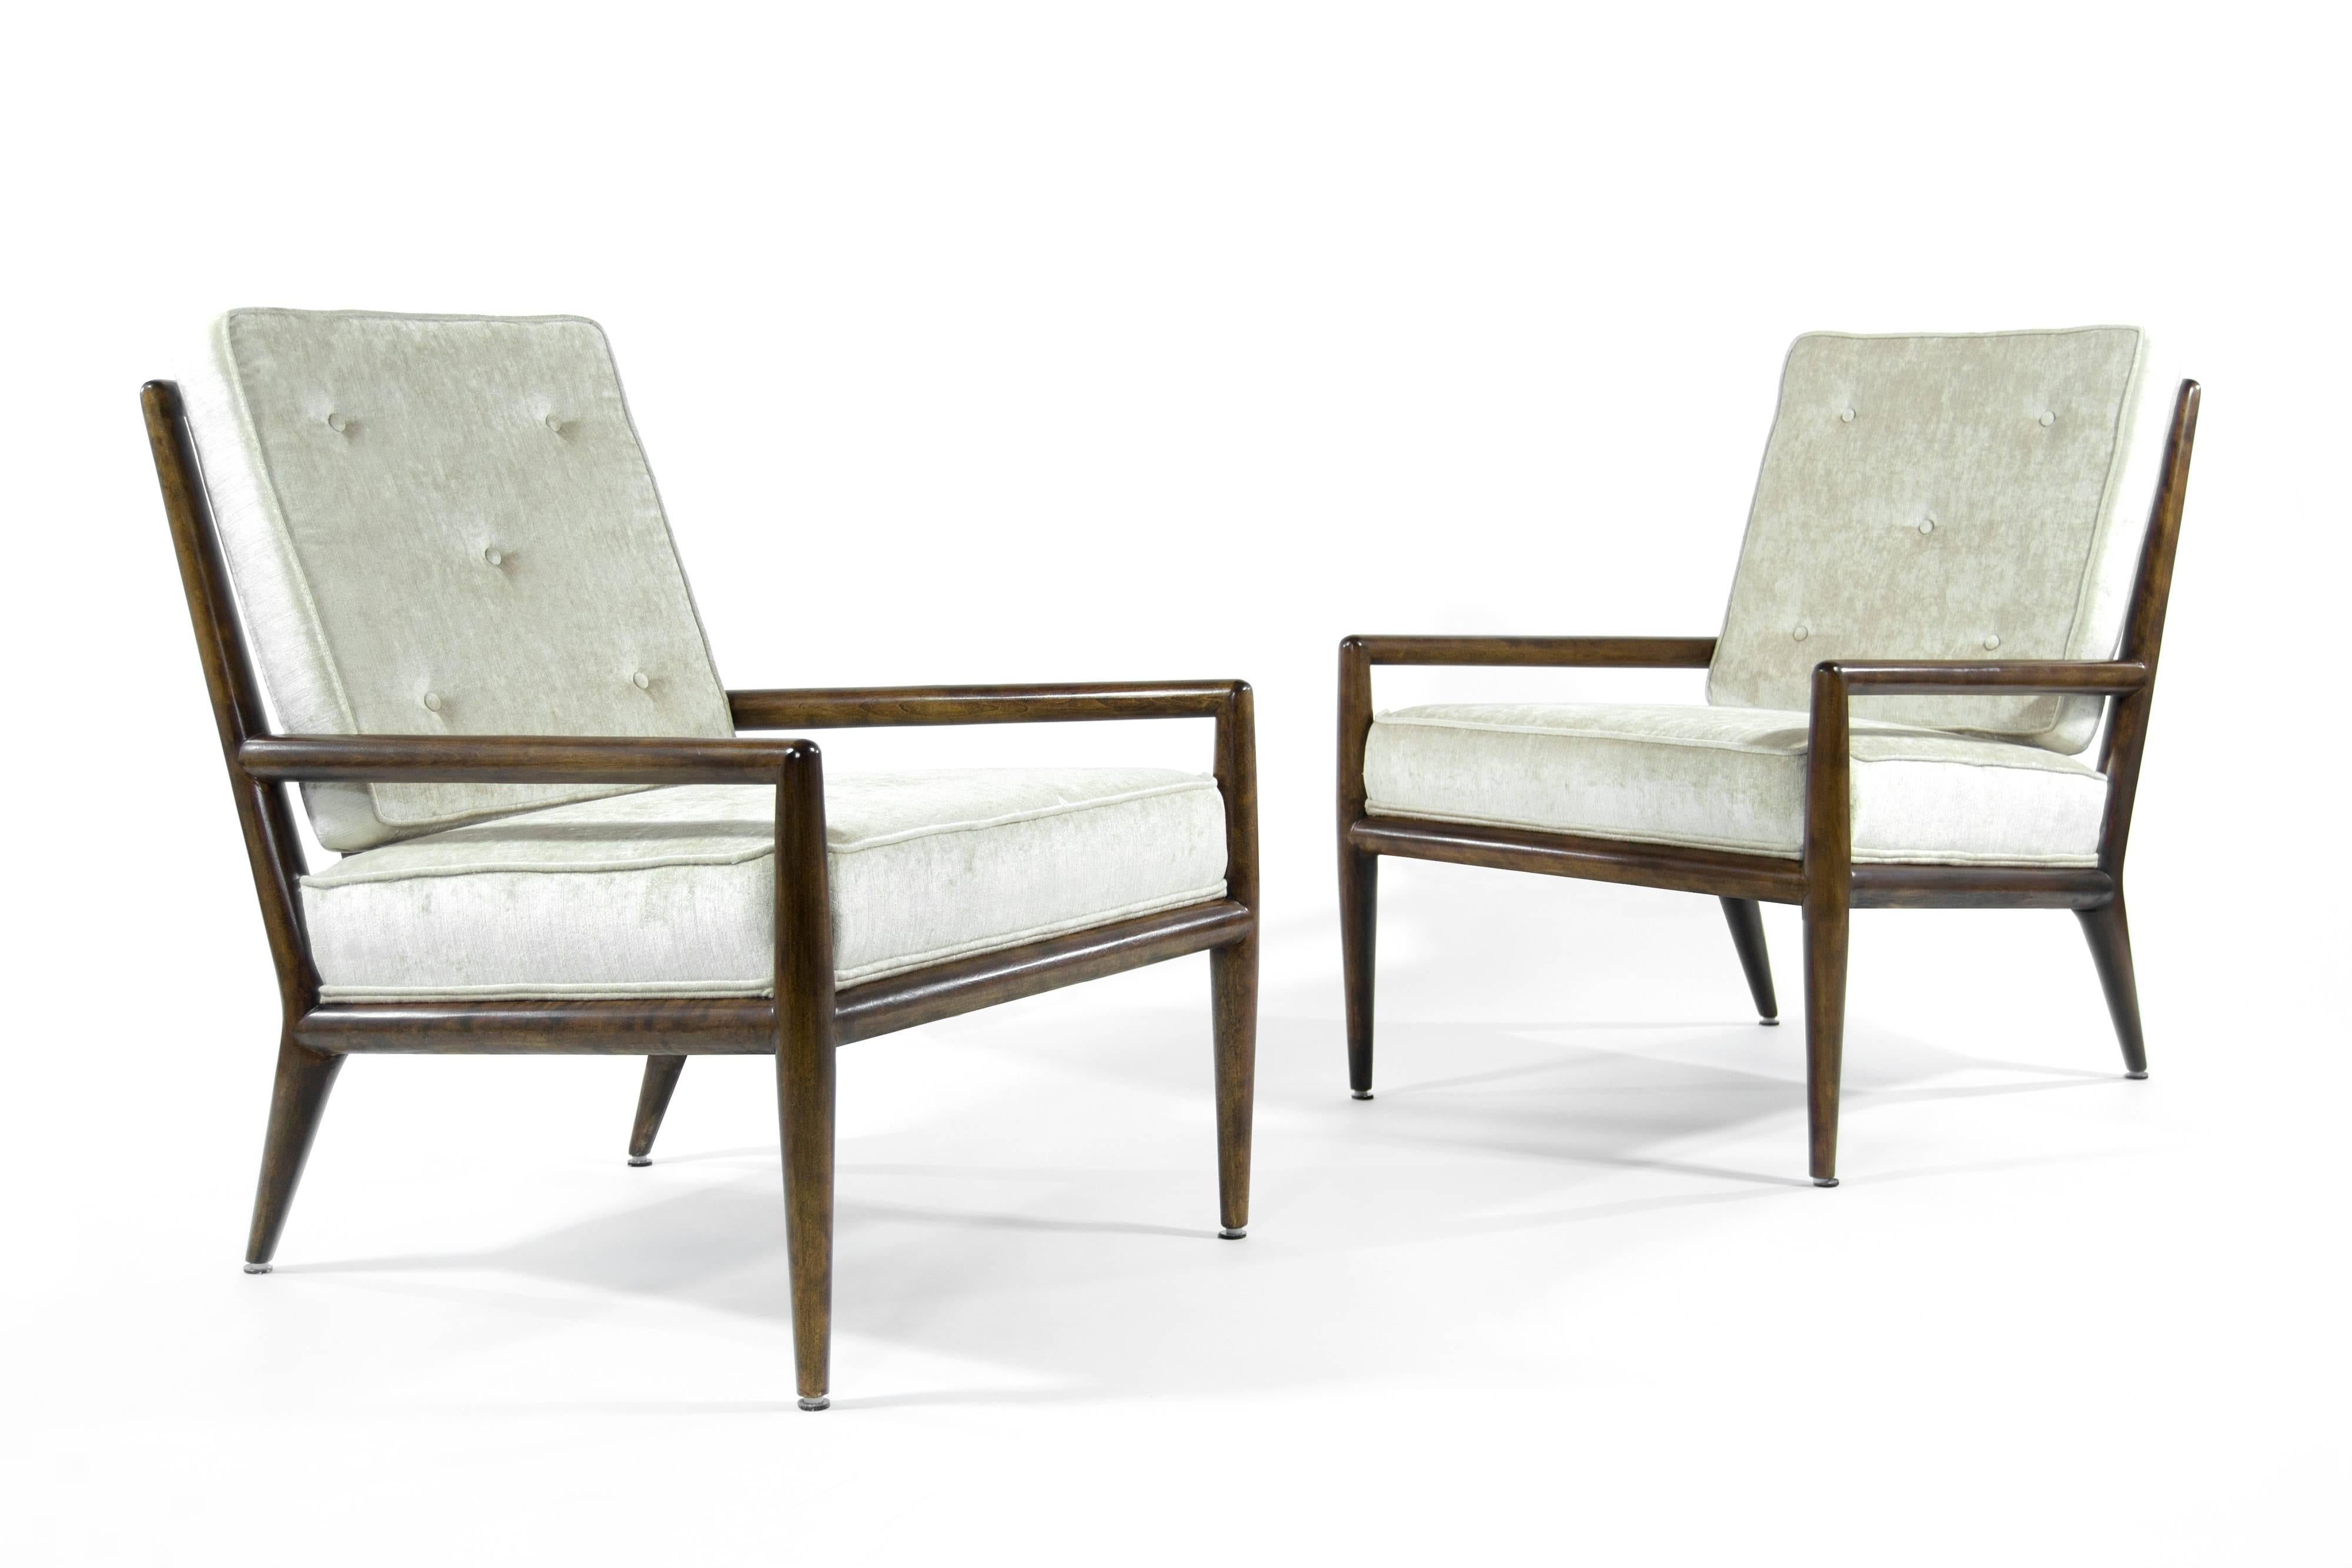 Lovely pair of Classic lounge chairs by T.H. Robsjohn-Gibbings for Widdicomb. Walnut fully restored. Newly upholstered in beige chenille.